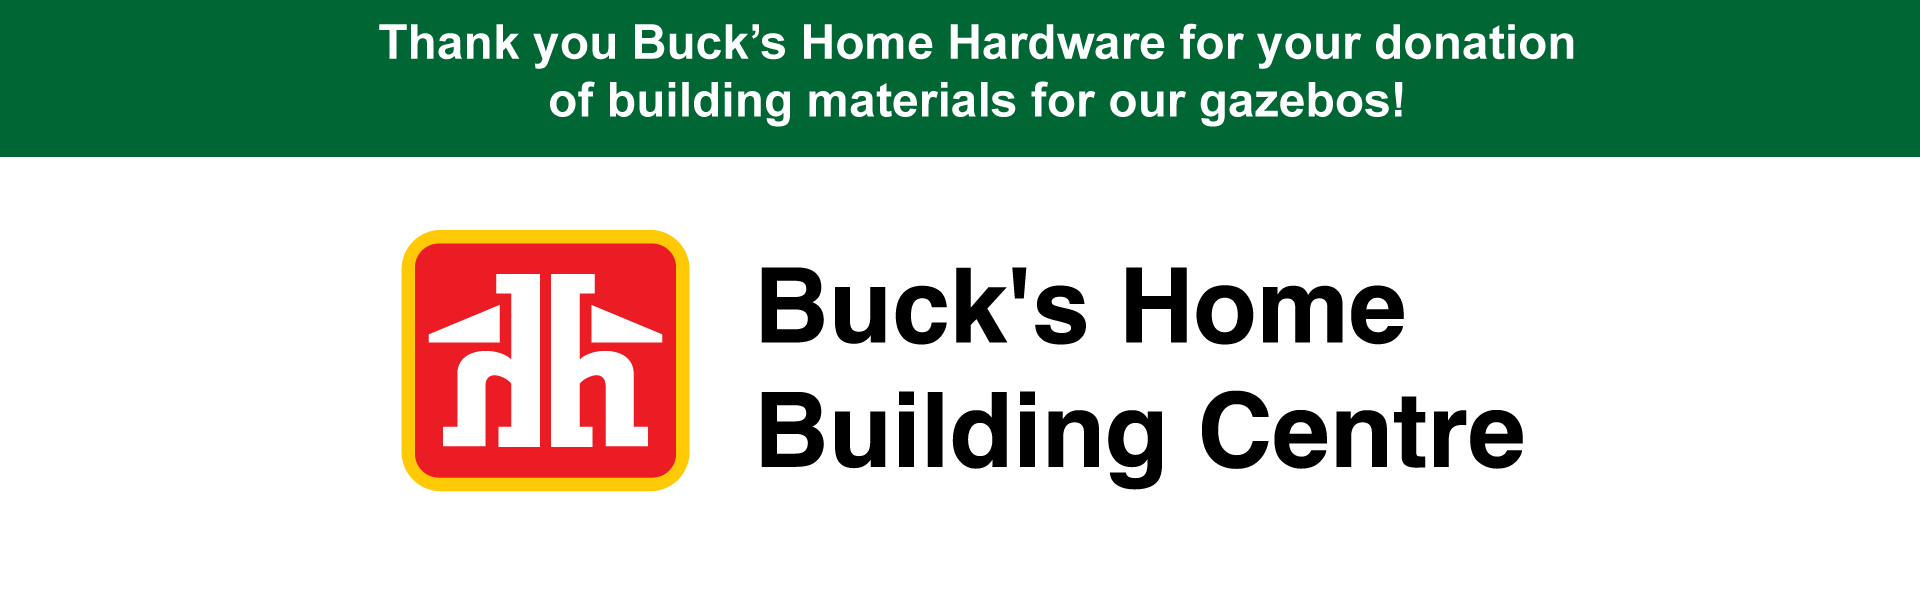 Thank you Buck’s Home Hardware for your donation of building materials for our gazebos!